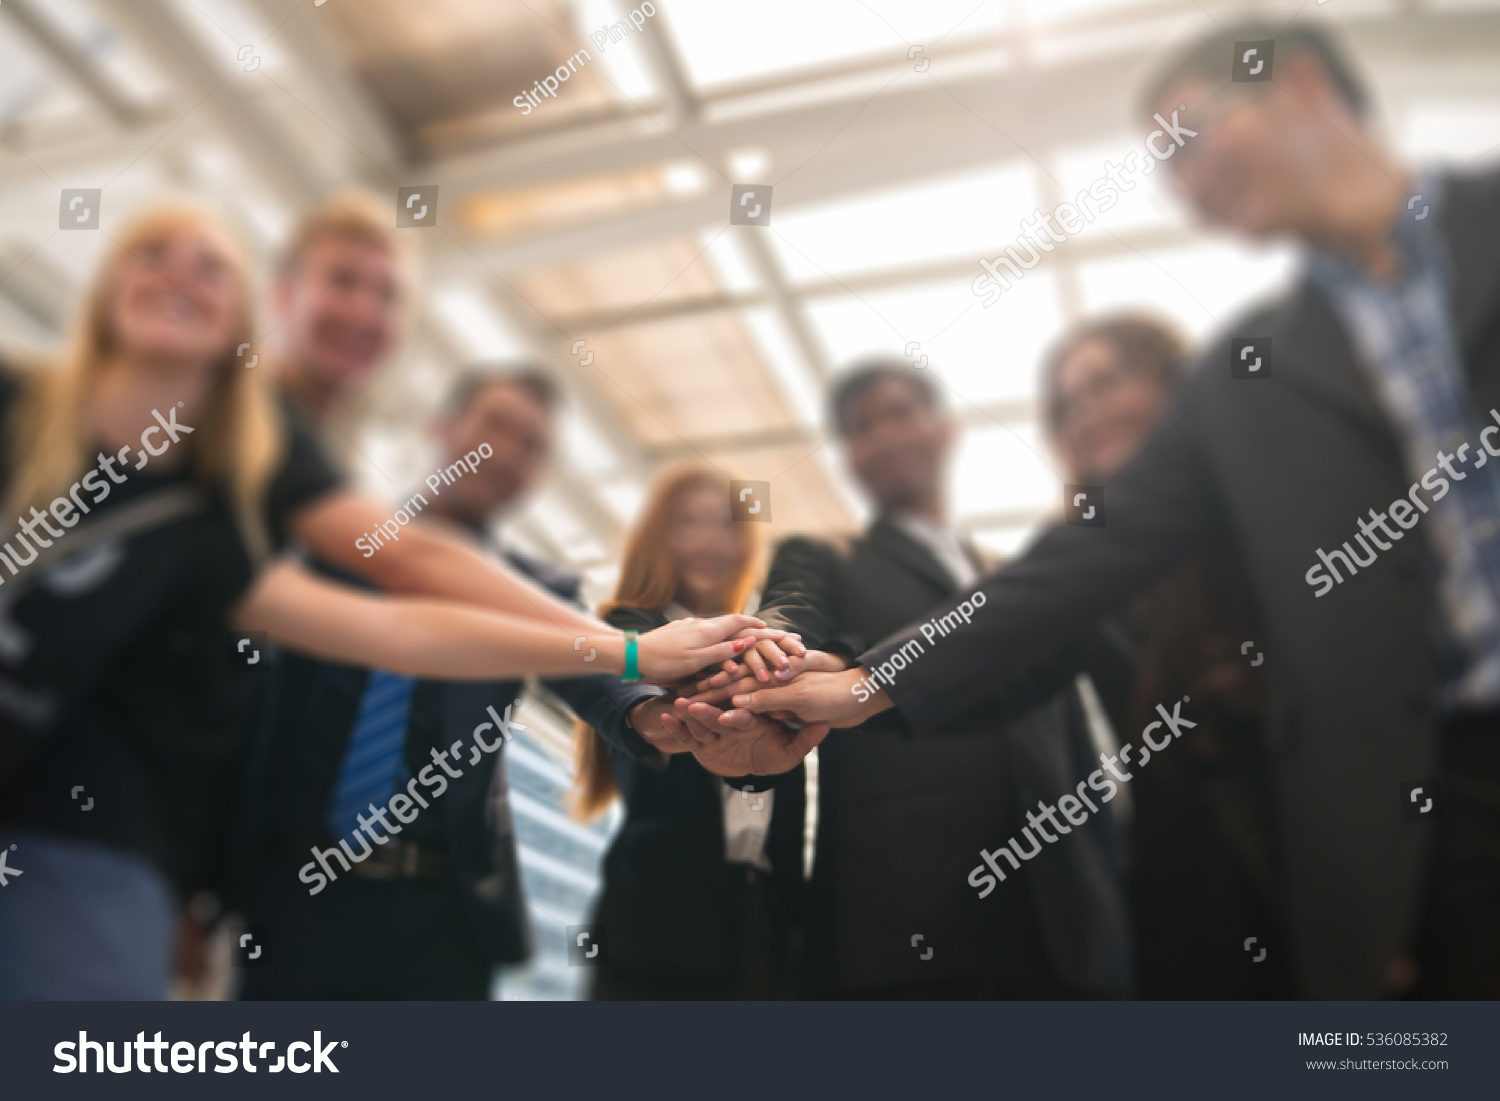 Group of Business People Join the Hand or United as Business  Group Teamwork Concept #536085382